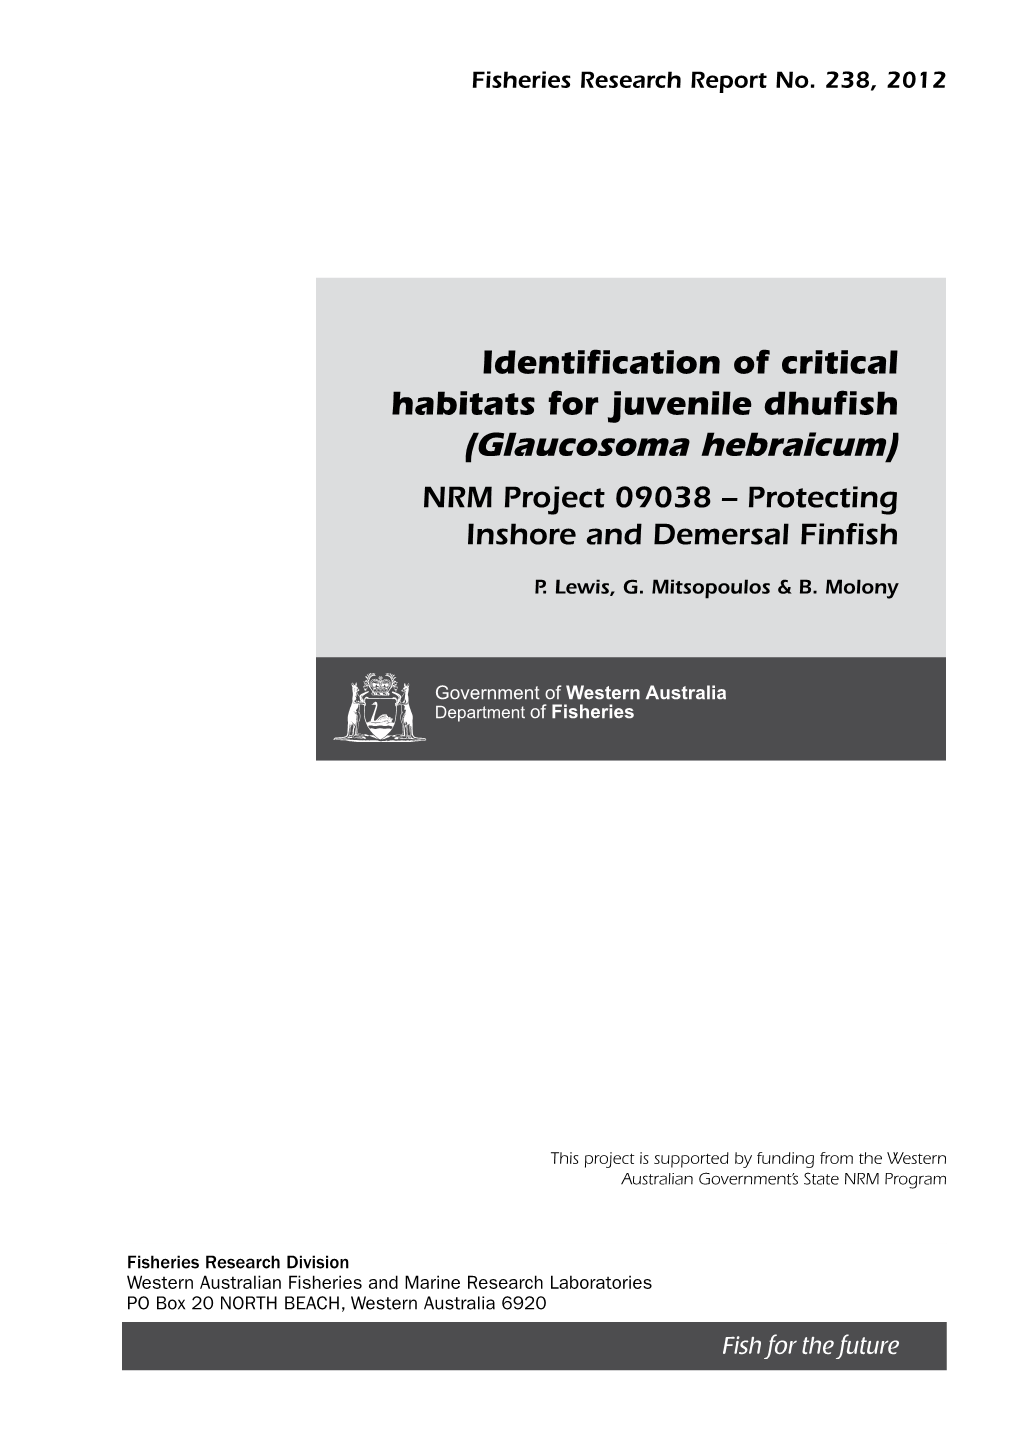 Identification of Critical Habitats for Juvenile Dhufish (Glaucosoma Hebraicum) NRM Project 09038 – Protecting Inshore and Demersal Finfish